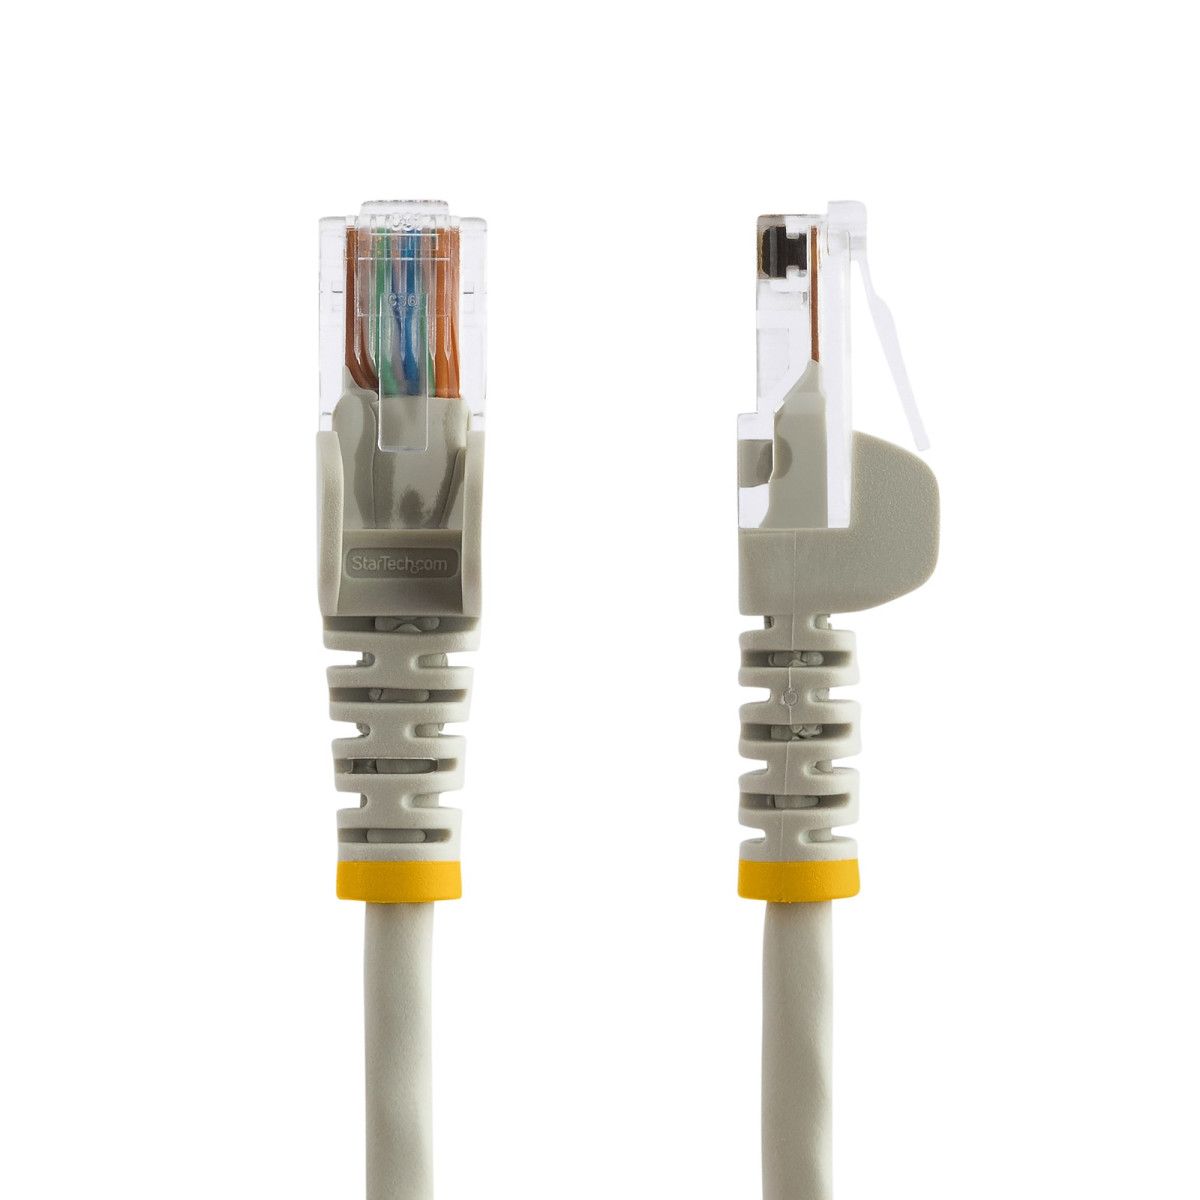 7m Gray Snagless Cat5e Patch Cable